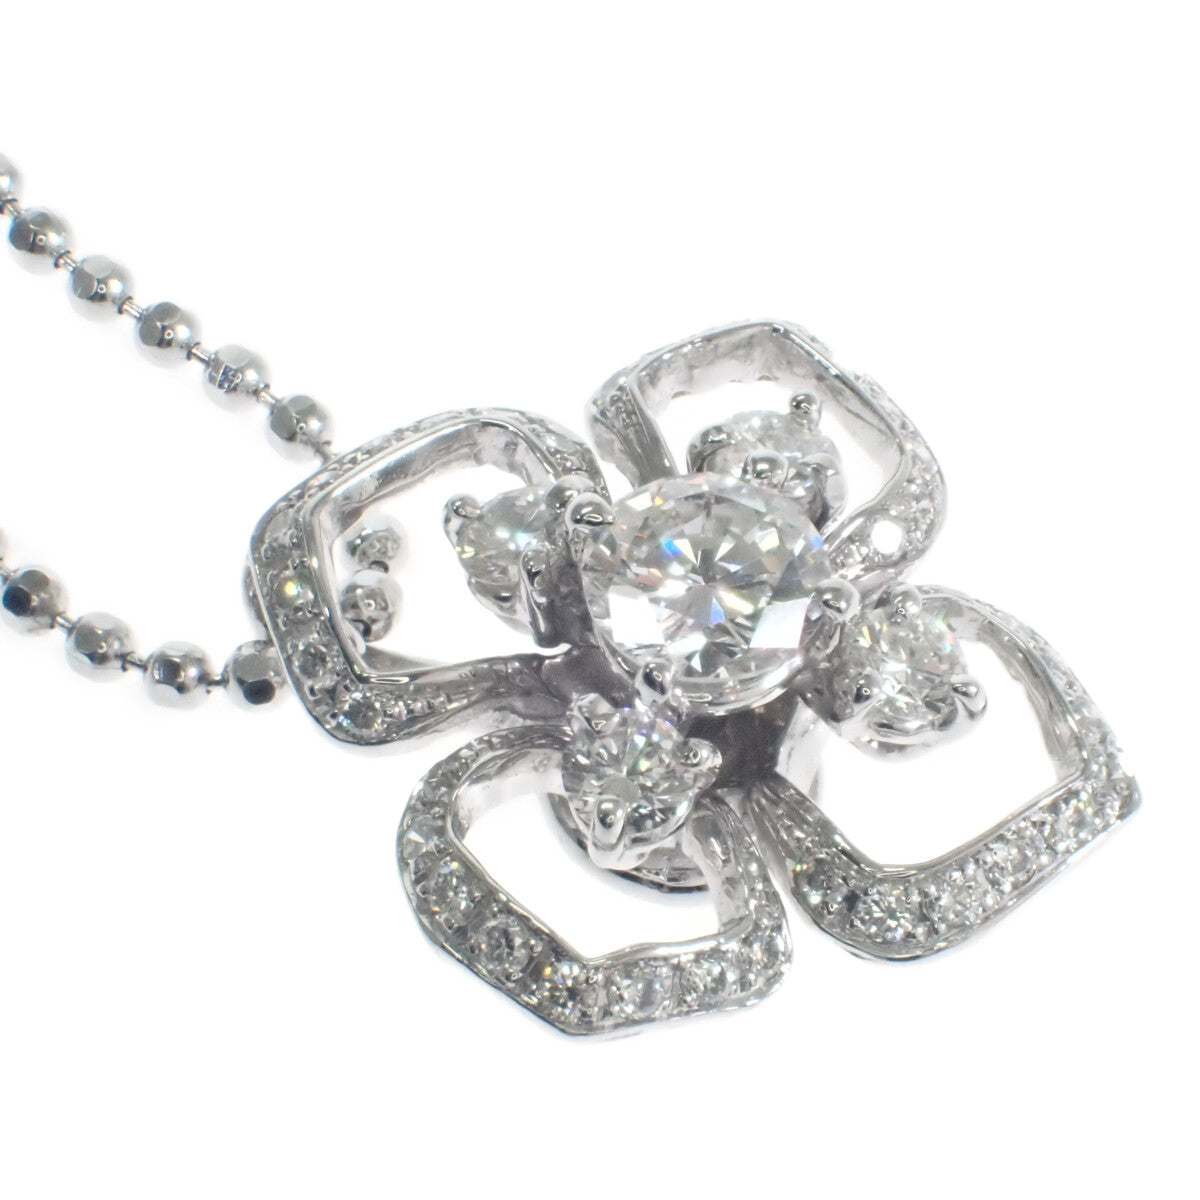 K18 White Gold Flower Design Necklace with 0.23ct Diamond for Women